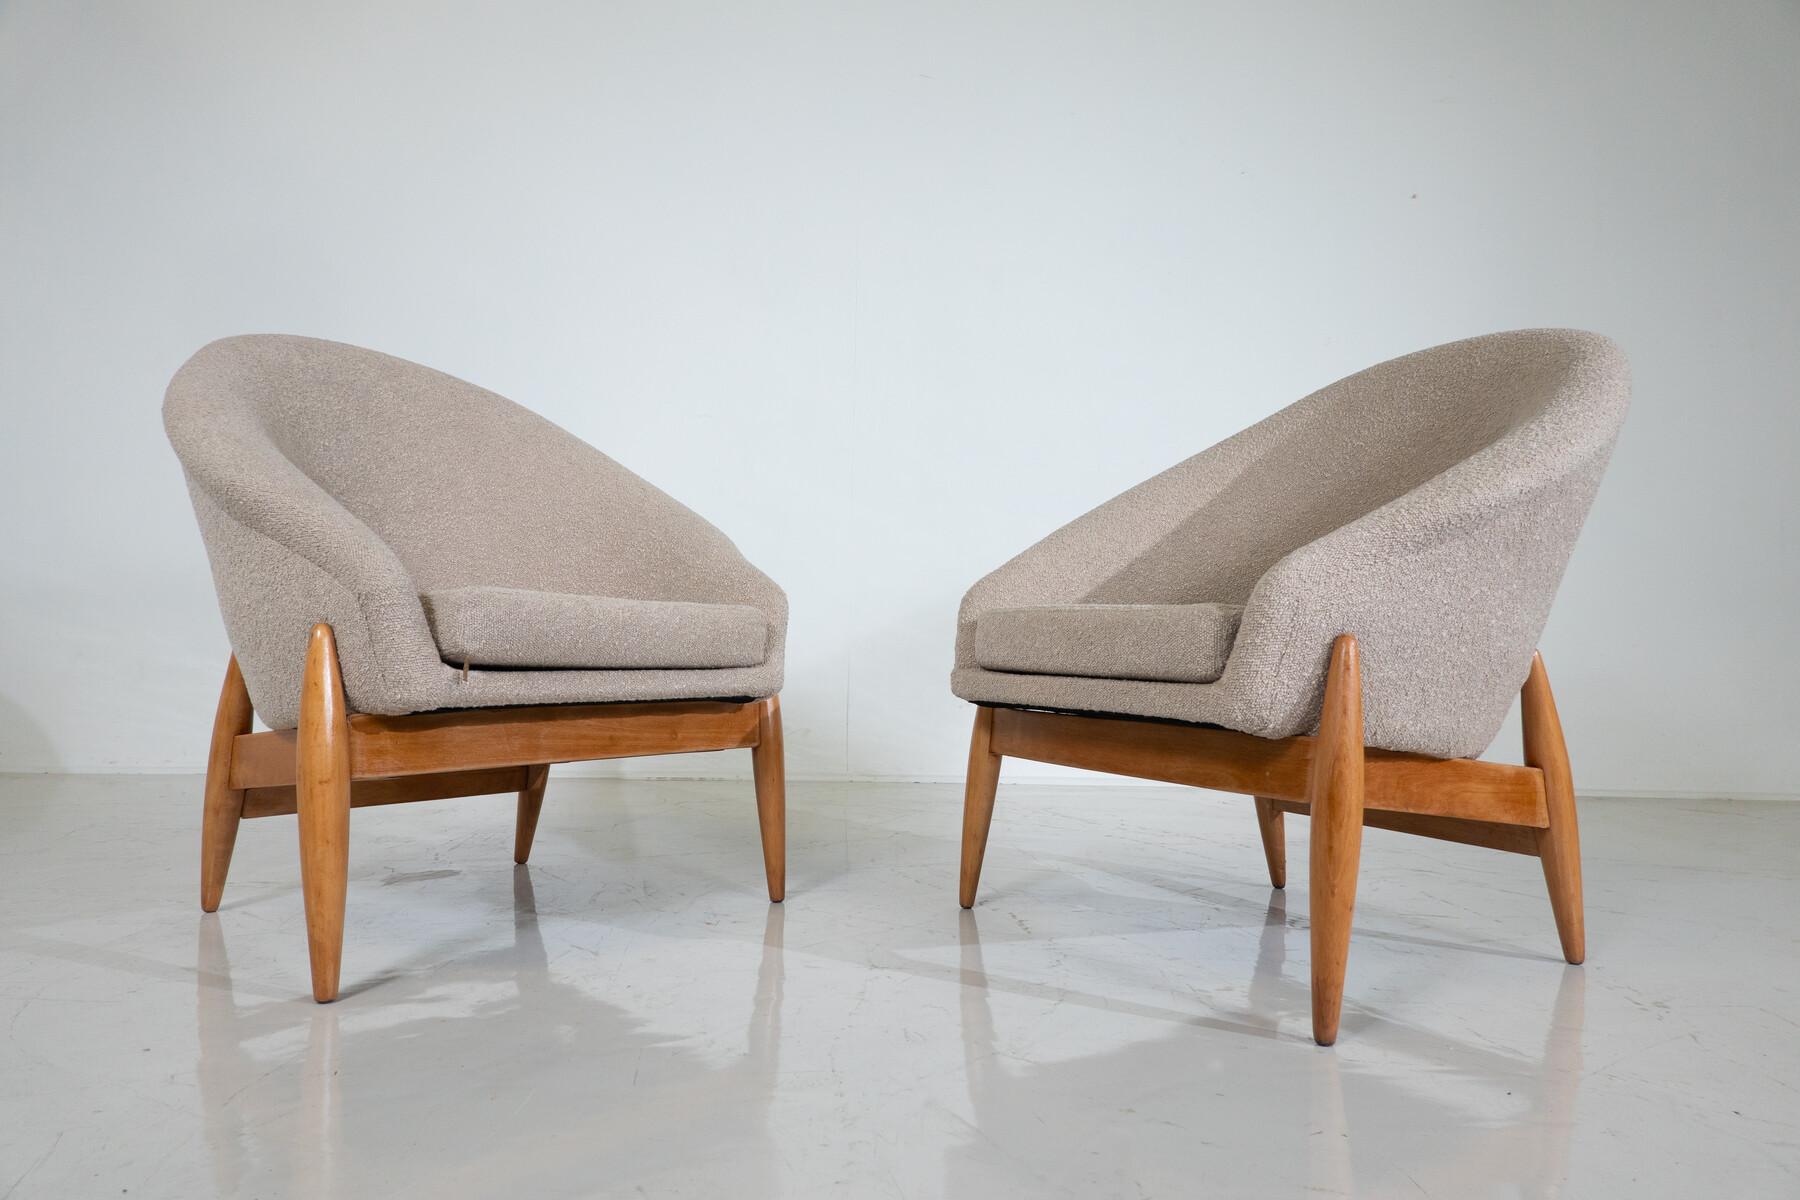 Pair of Mid-Century Modern Beige Fabric Armchairs by Julia Gaubek - Hungary 1950 For Sale 3